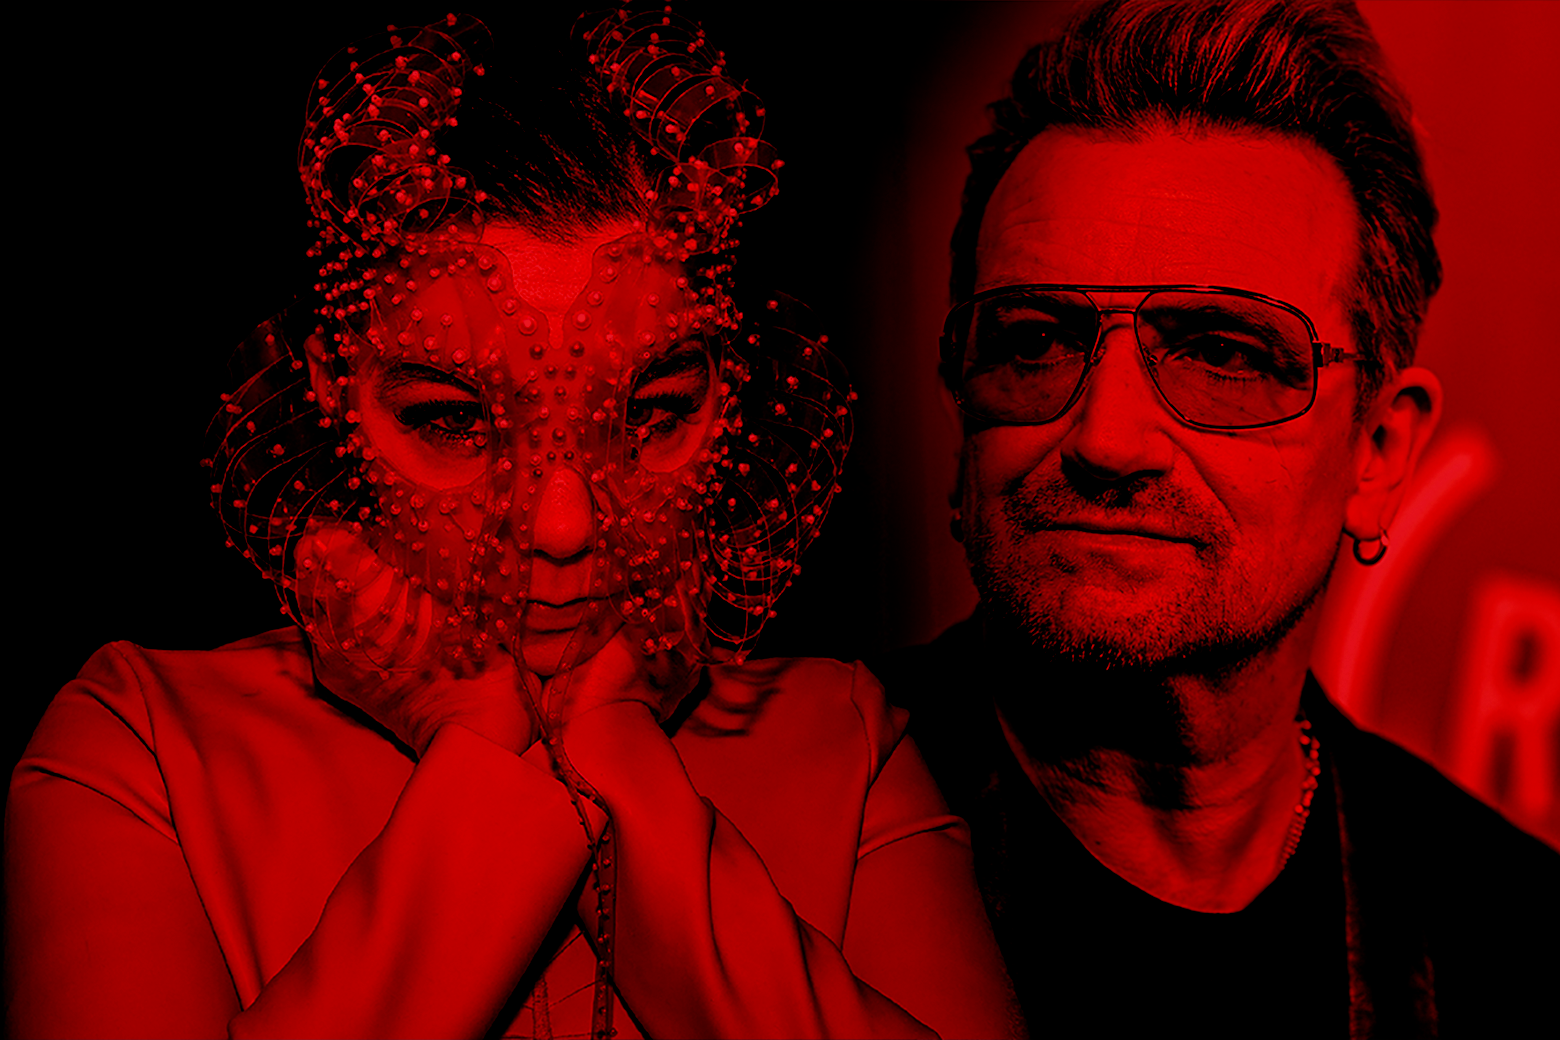 Björk is all journey, all process, and U2 is all outcome, all destination.